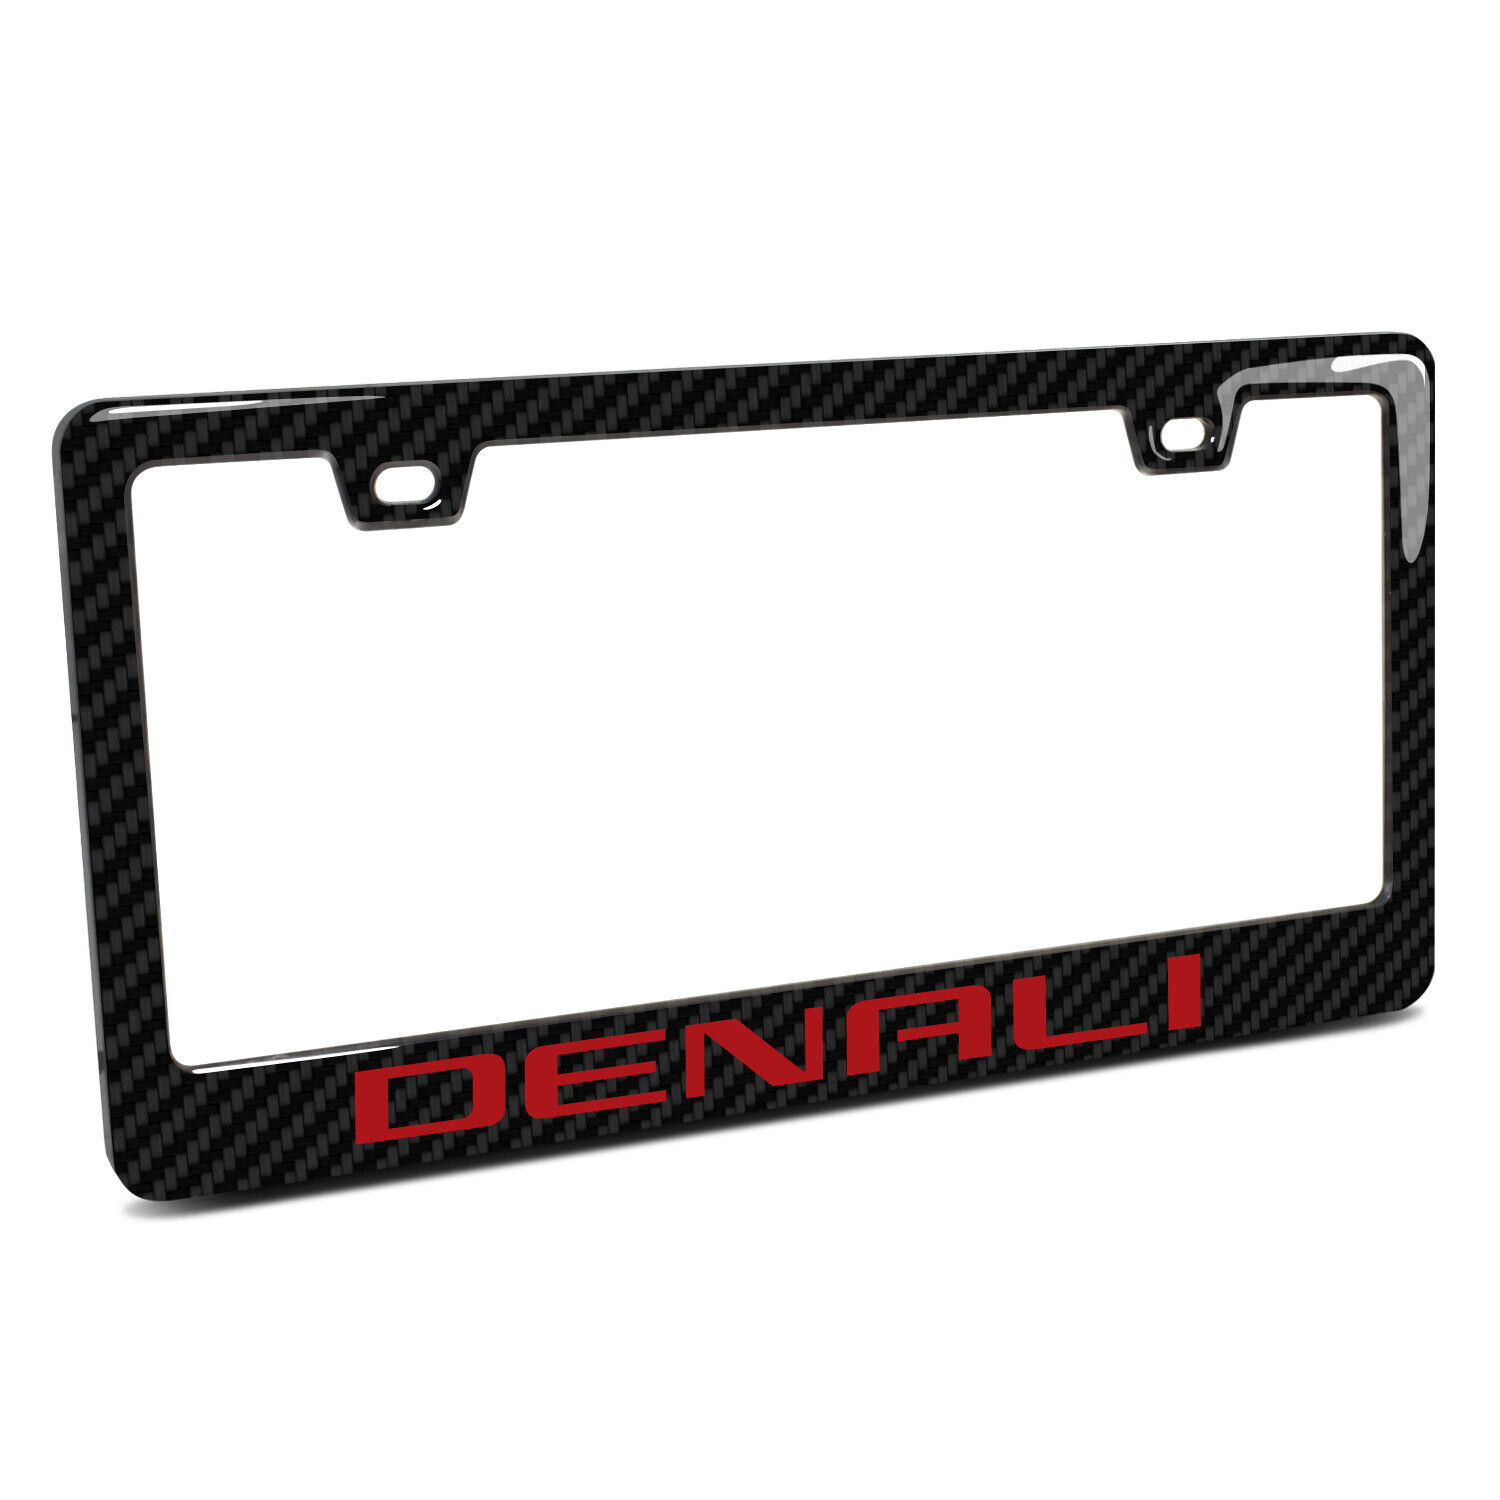 GMC Denali in Red in 3D Real Carbon Fiber Finish ABS Plastic License Plate Frame